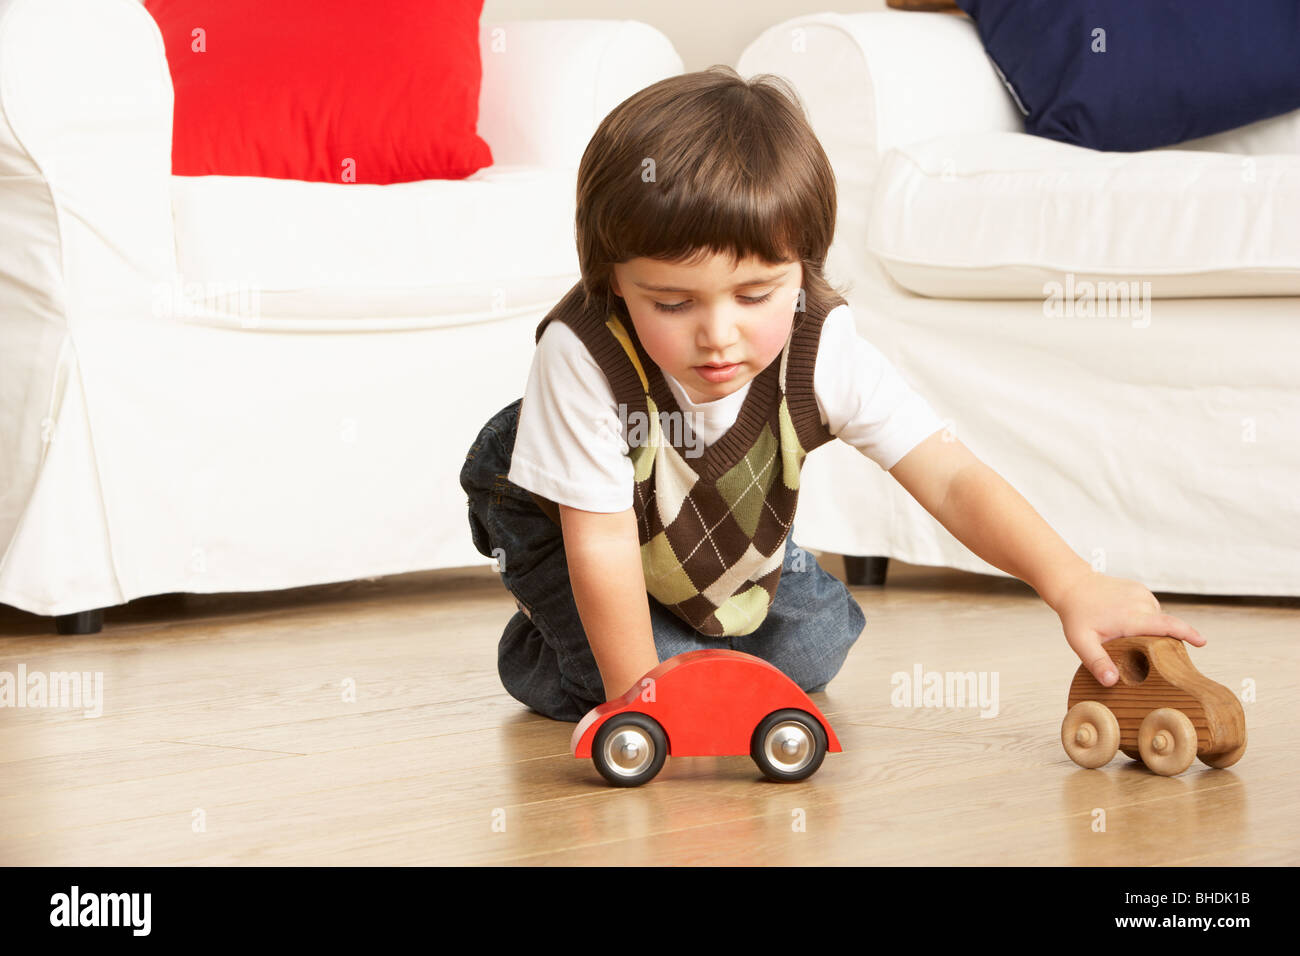 Young Boy Playing With Toy Cars At Home Stock Photo